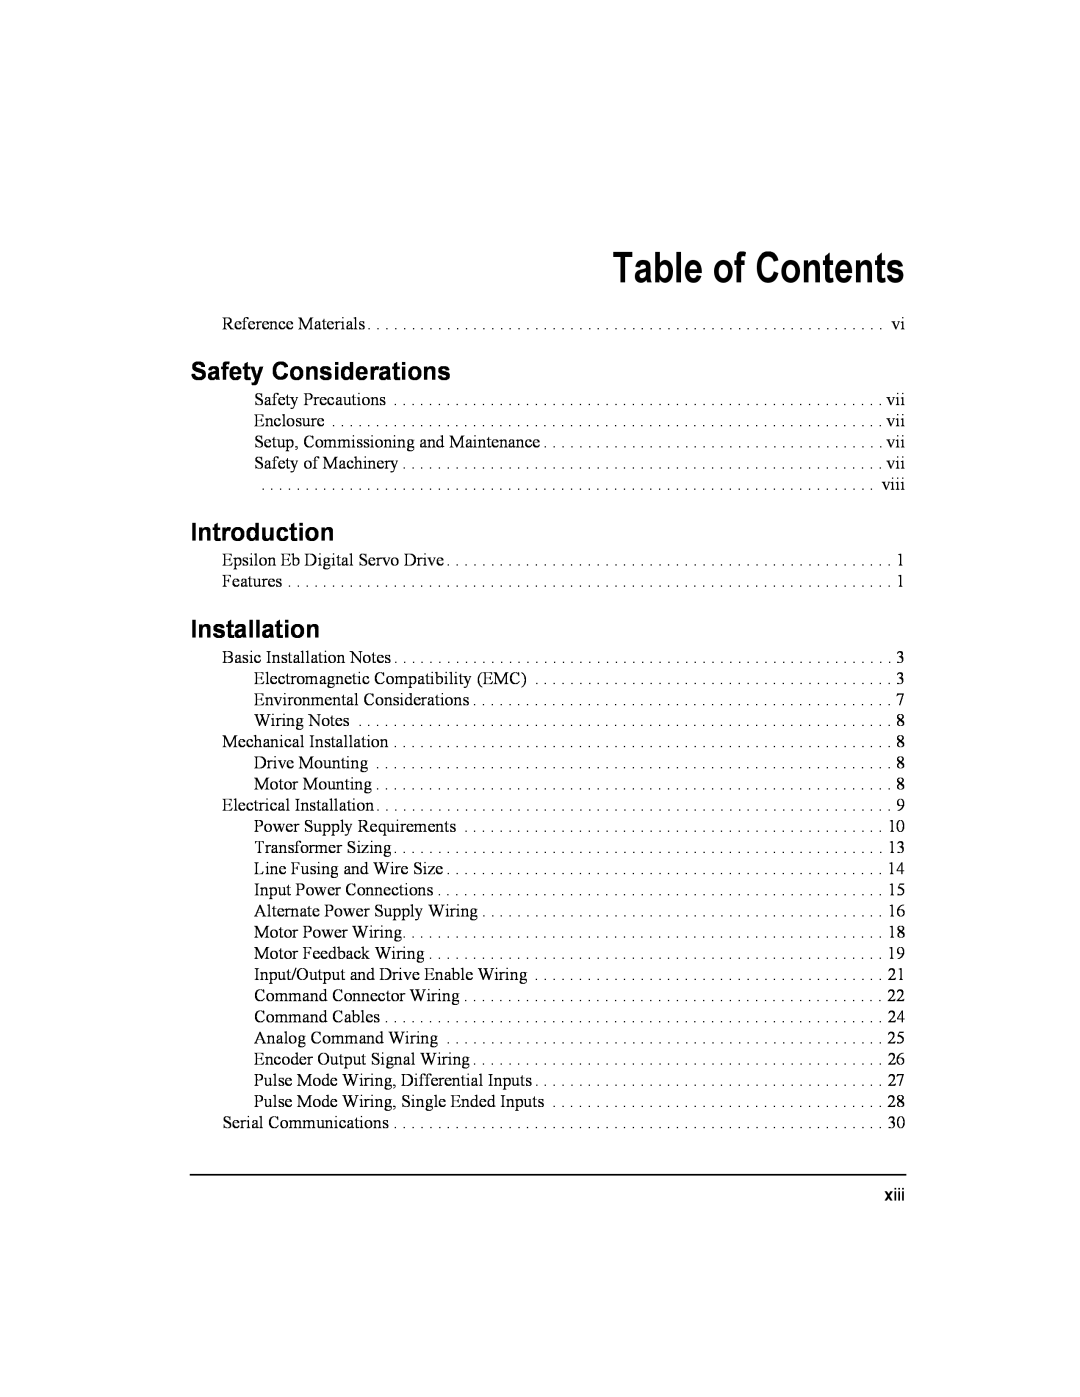 Emerson Epsilon Eb Digital Servo Drive, 400501-05 Table of Contents, Safety Considerations, Introduction, Installation 